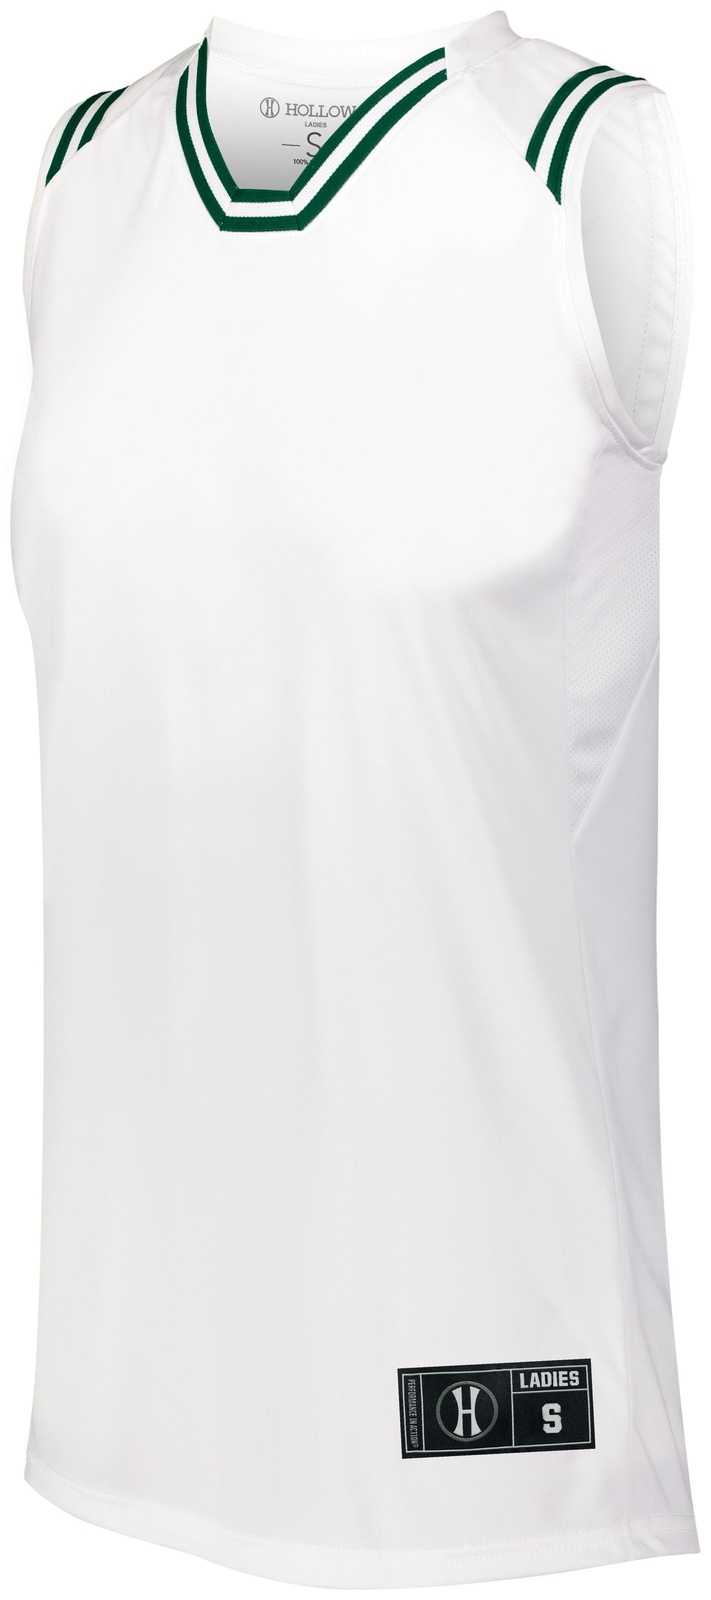 NBA Nike Pro Combat Two Padded Compression Tank Top White Size 2XL